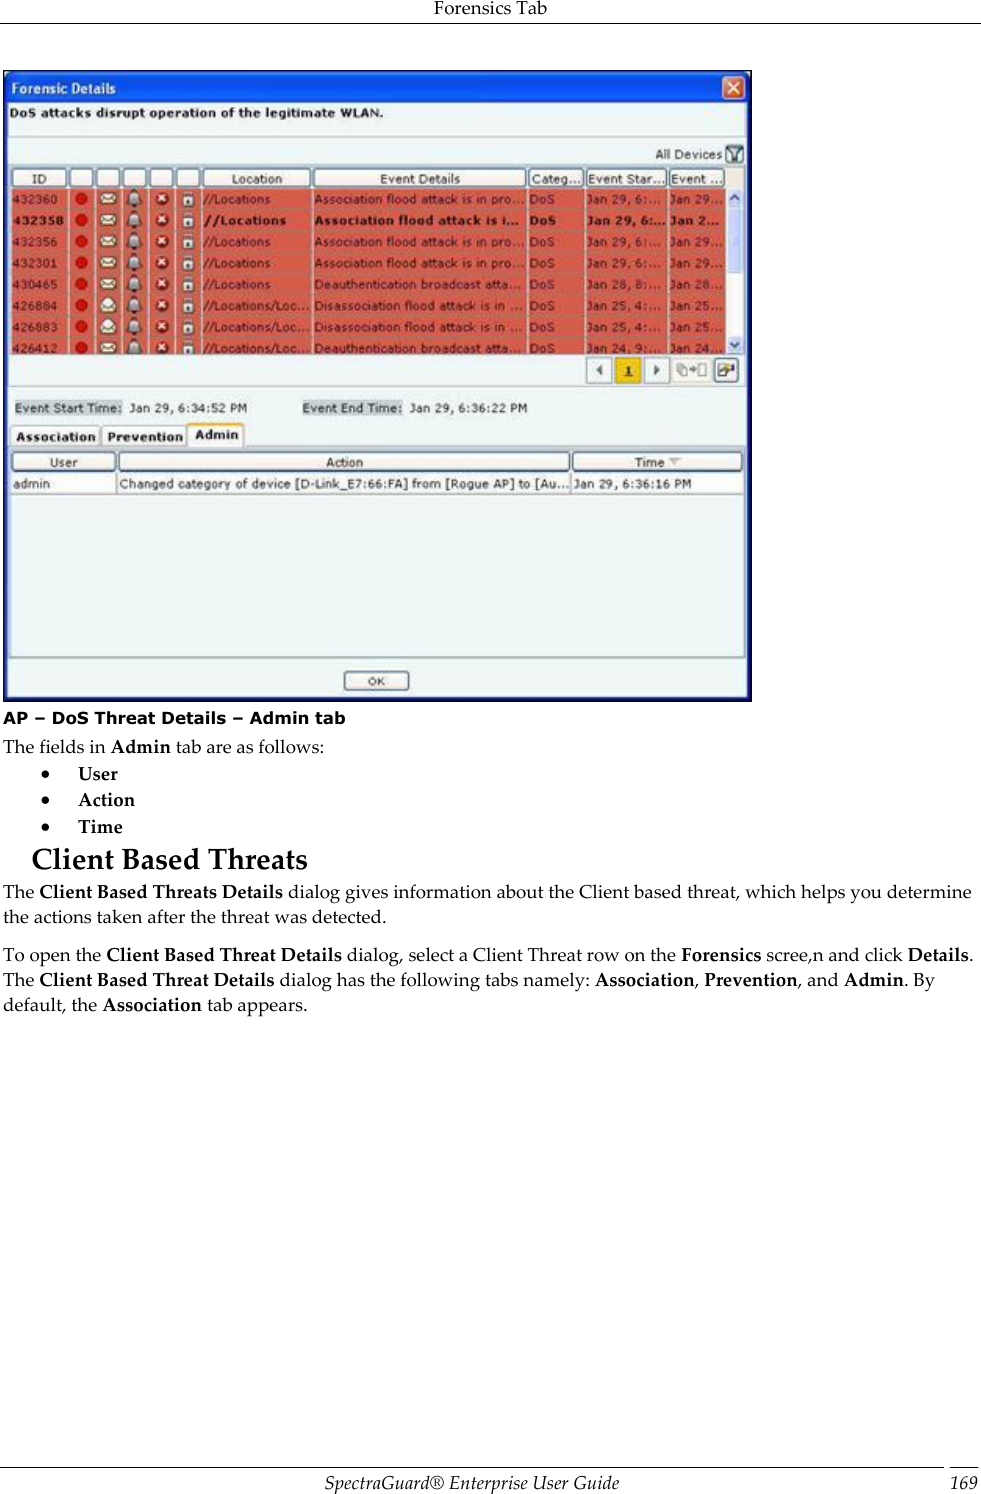 Forensics Tab SpectraGuard®  Enterprise User Guide 169  AP – DoS Threat Details – Admin tab The fields in Admin tab are as follows:  User  Action  Time Client Based Threats The Client Based Threats Details dialog gives information about the Client based threat, which helps you determine the actions taken after the threat was detected. To open the Client Based Threat Details dialog, select a Client Threat row on the Forensics scree,n and click Details. The Client Based Threat Details dialog has the following tabs namely: Association, Prevention, and Admin. By default, the Association tab appears.   